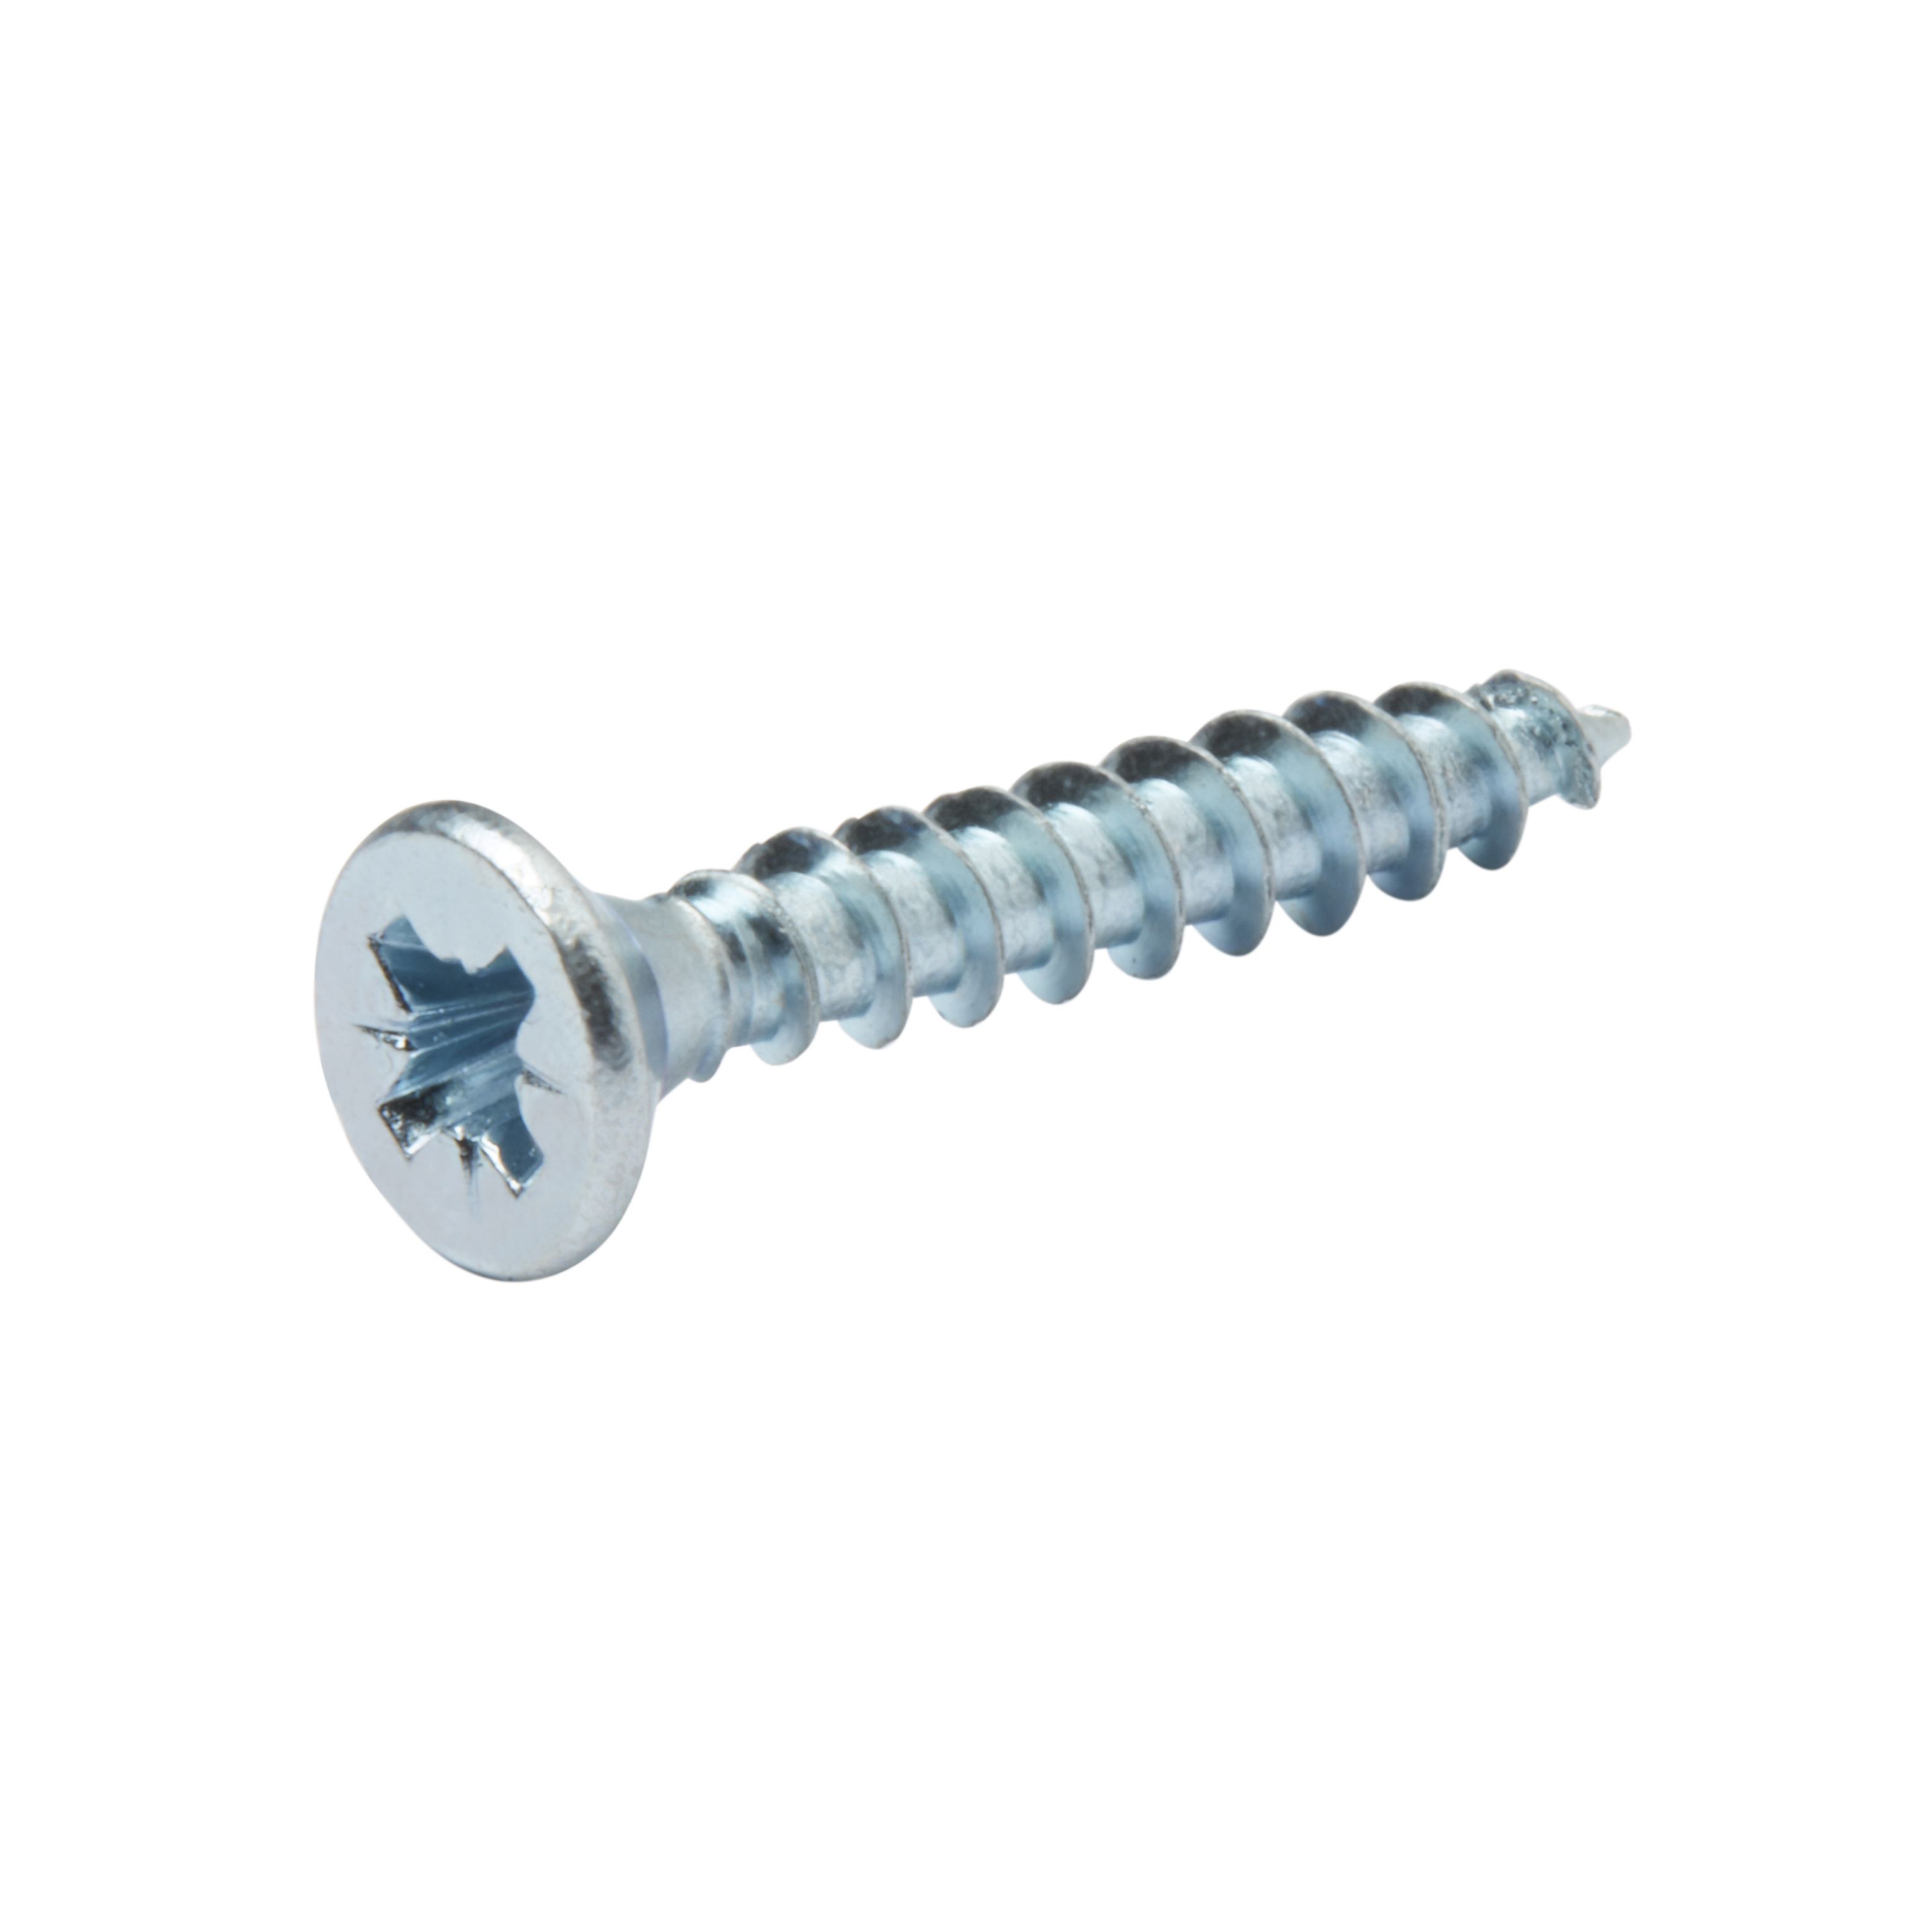 Diall Zinc-plated Carbon steel Screw (Dia)4mm (L)50mm, Pack of 100